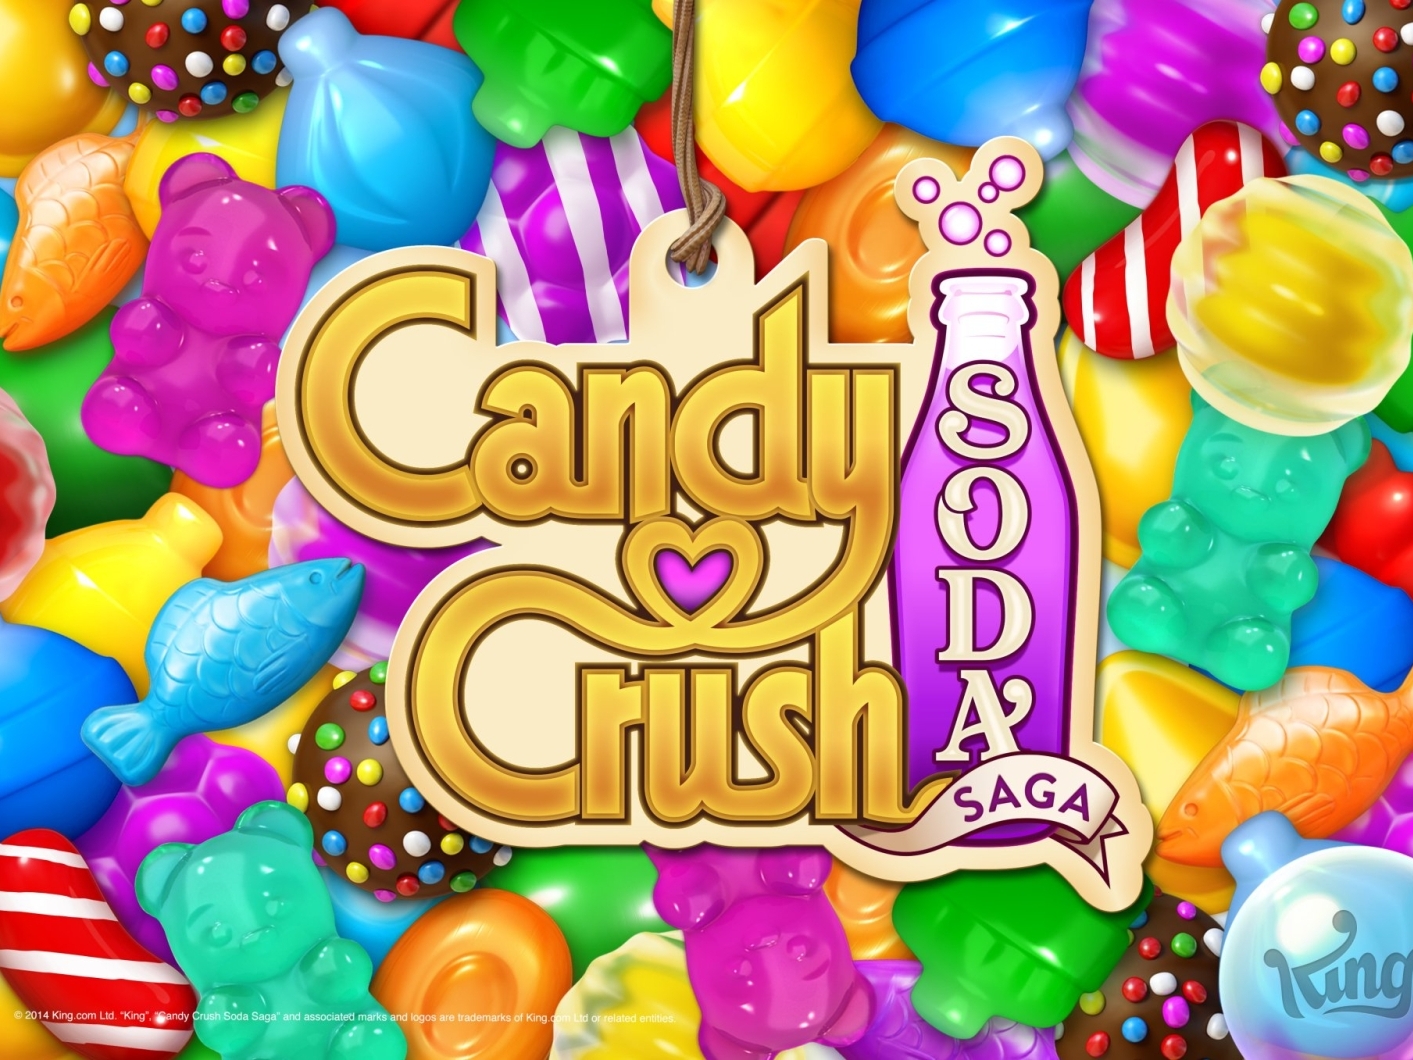 Candy Crush Poster for Sale by TobyDoherty